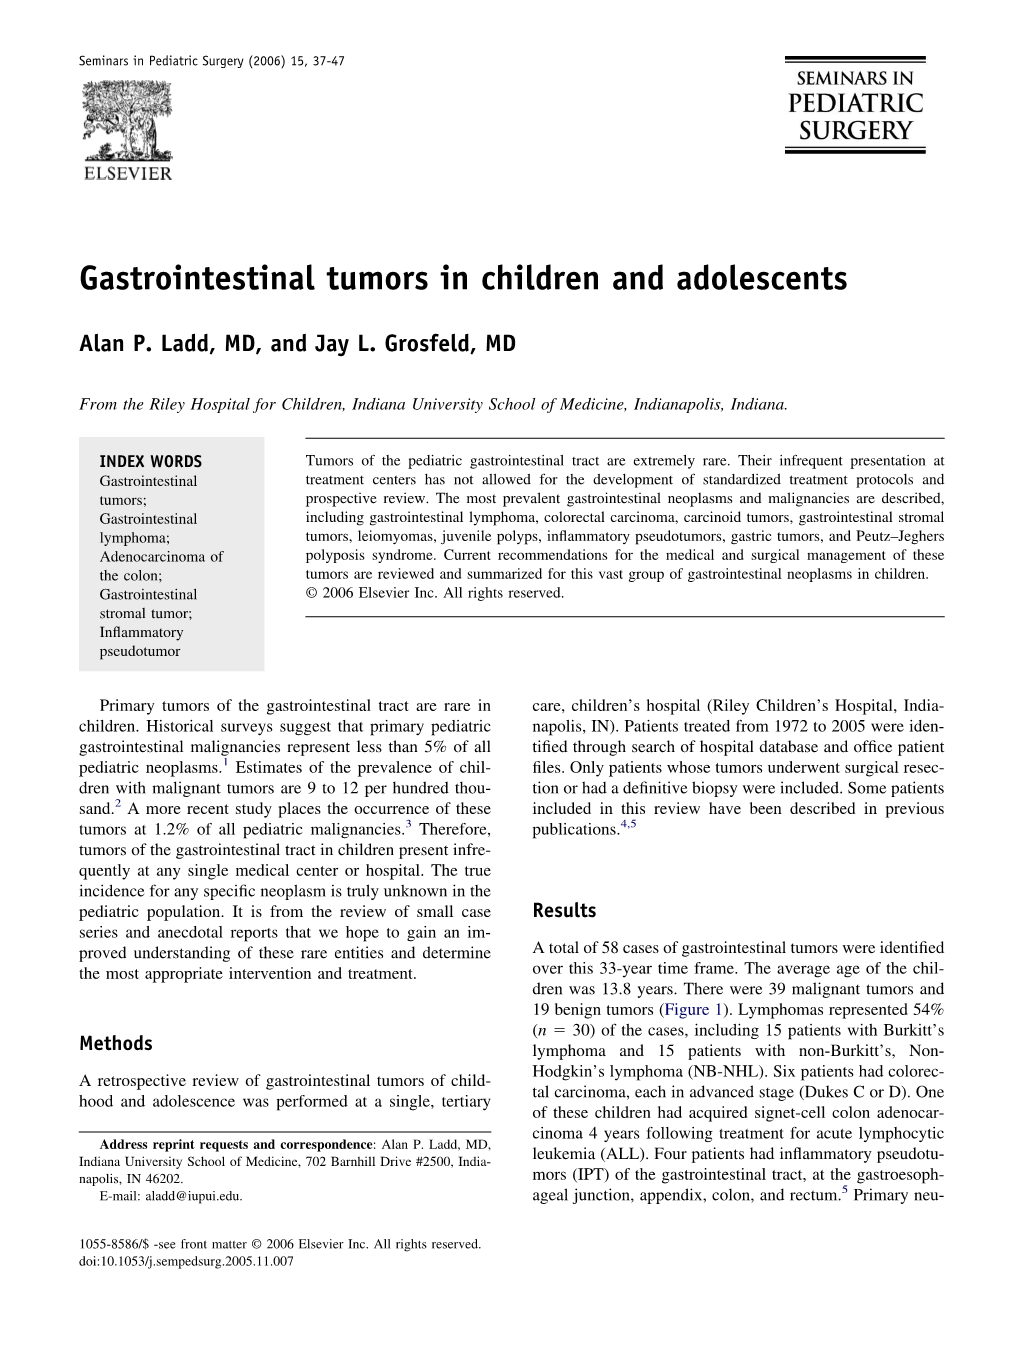 Gastrointestinal Tumors in Children and Adolescents